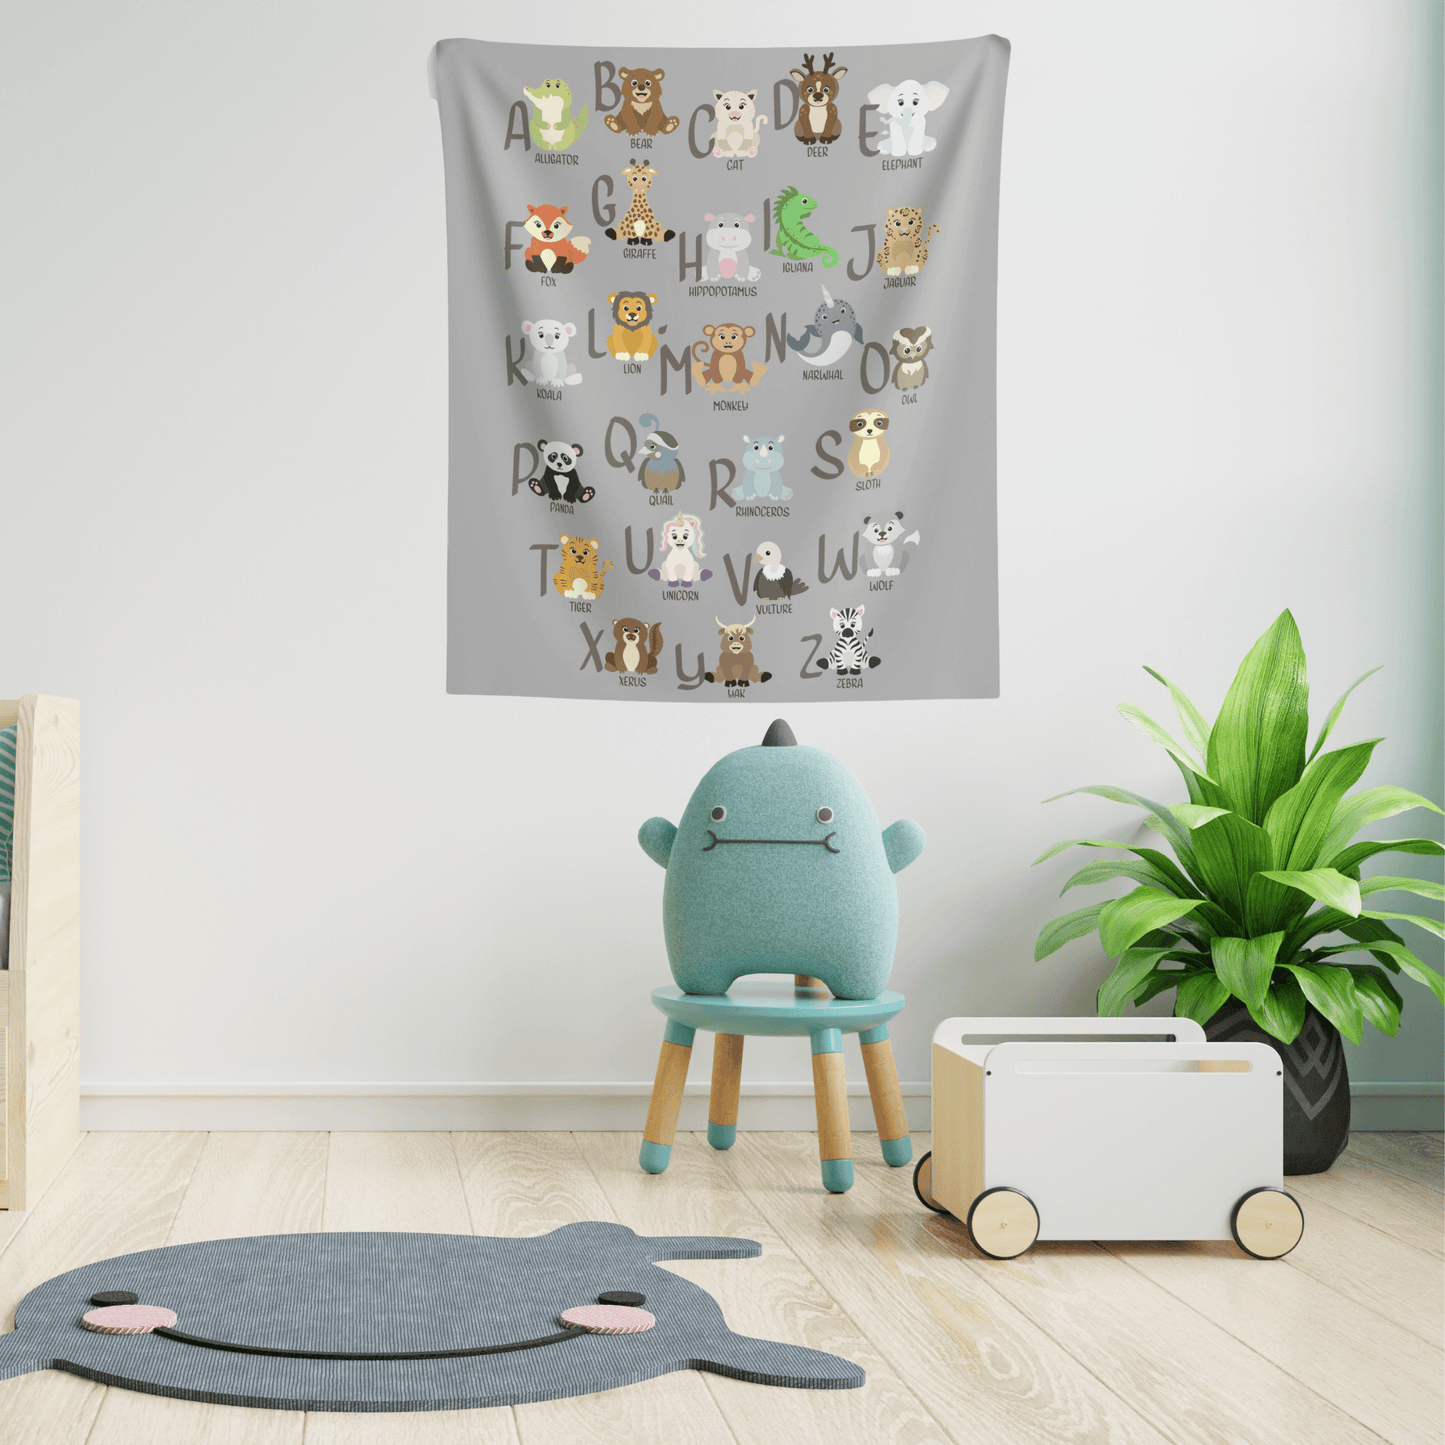 Animal Alphabet Chart Wall Tapestry - Wall Decor - Wall Hanging Art For Kids